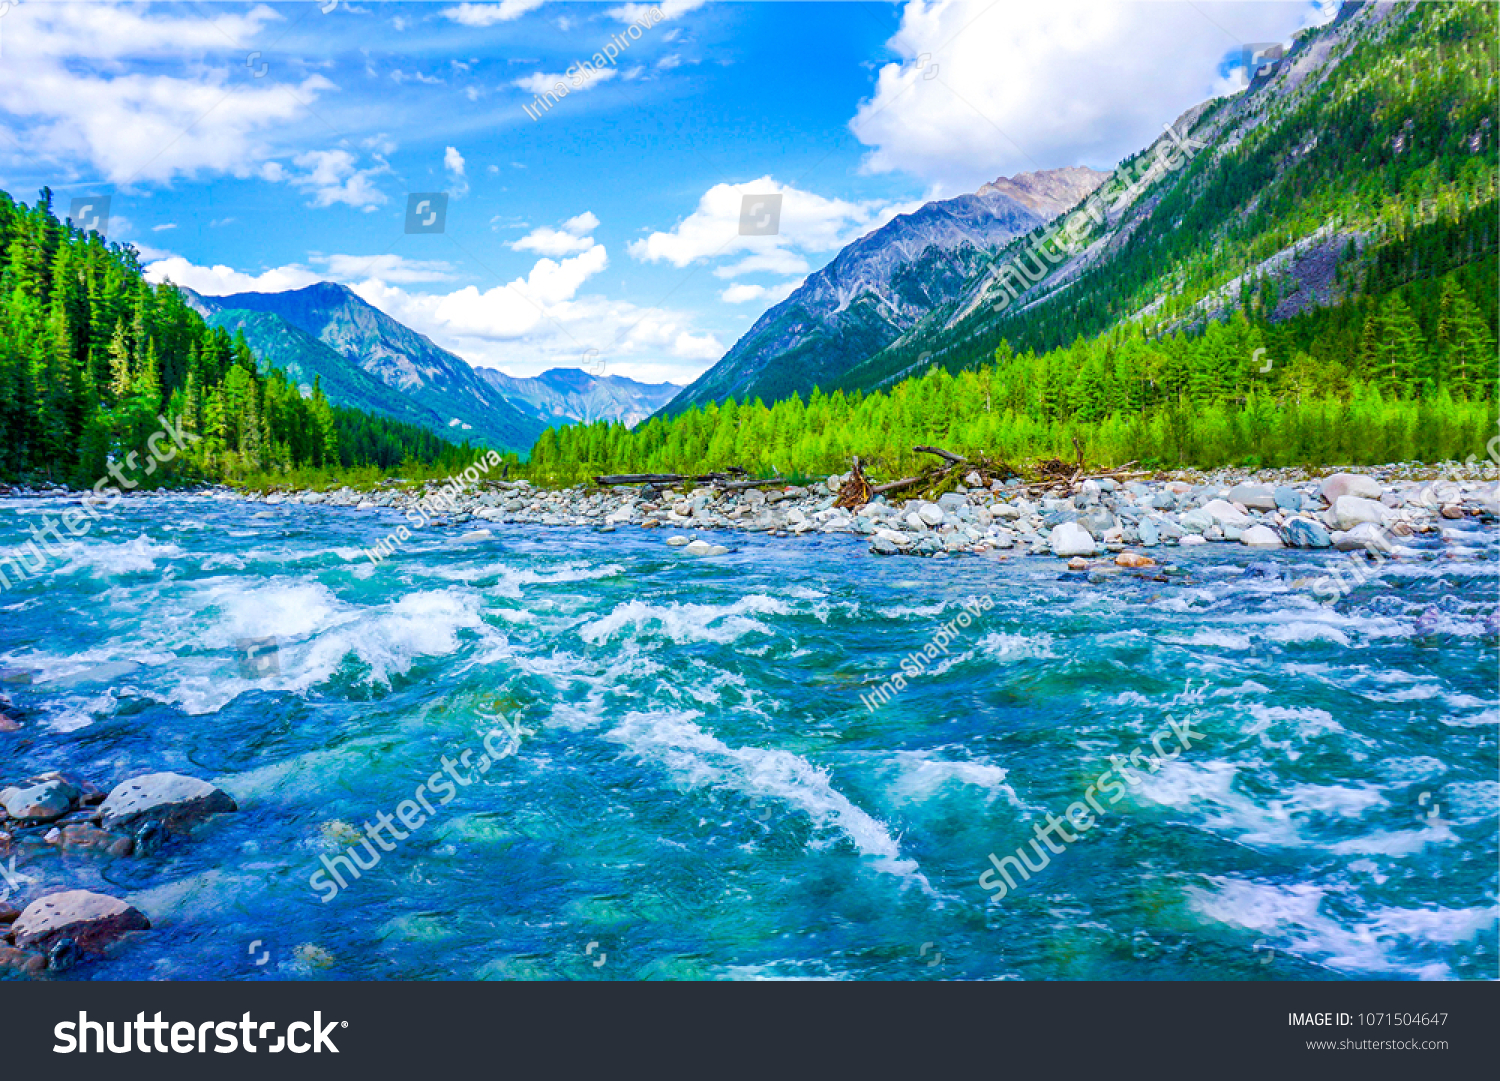 Mountain blue river stream water landscape in rocky nature #1071504647